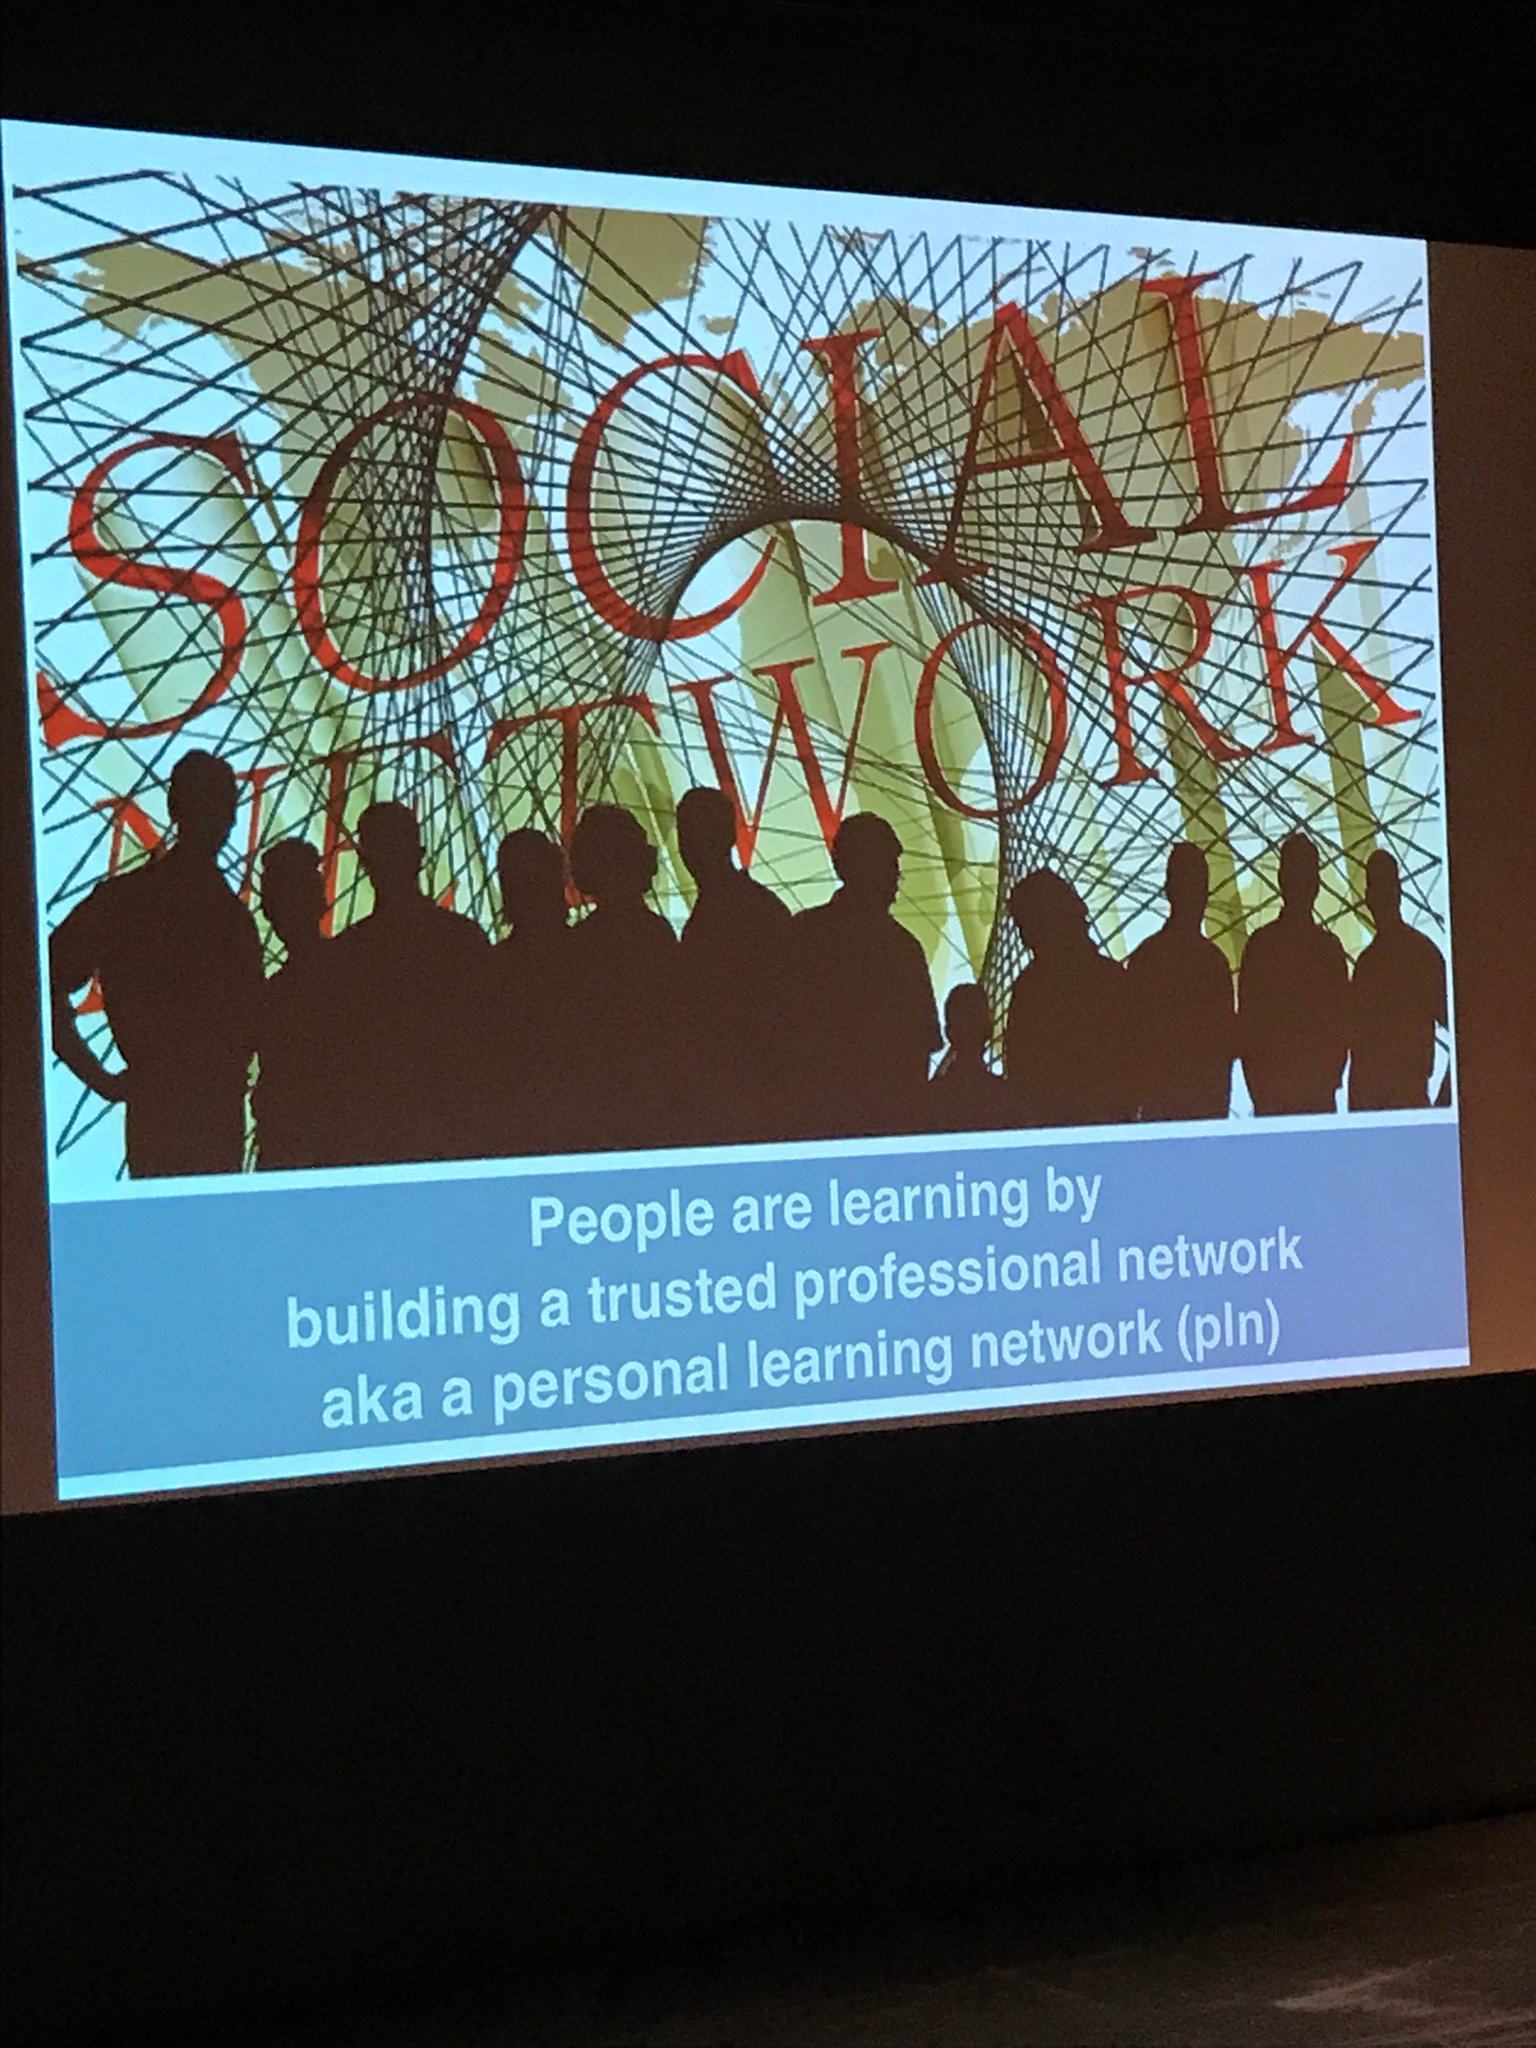 Learning through professional networks - managers, employees and students with @C4LPT #SUSALT17 https://t.co/WOYF7lIBxk